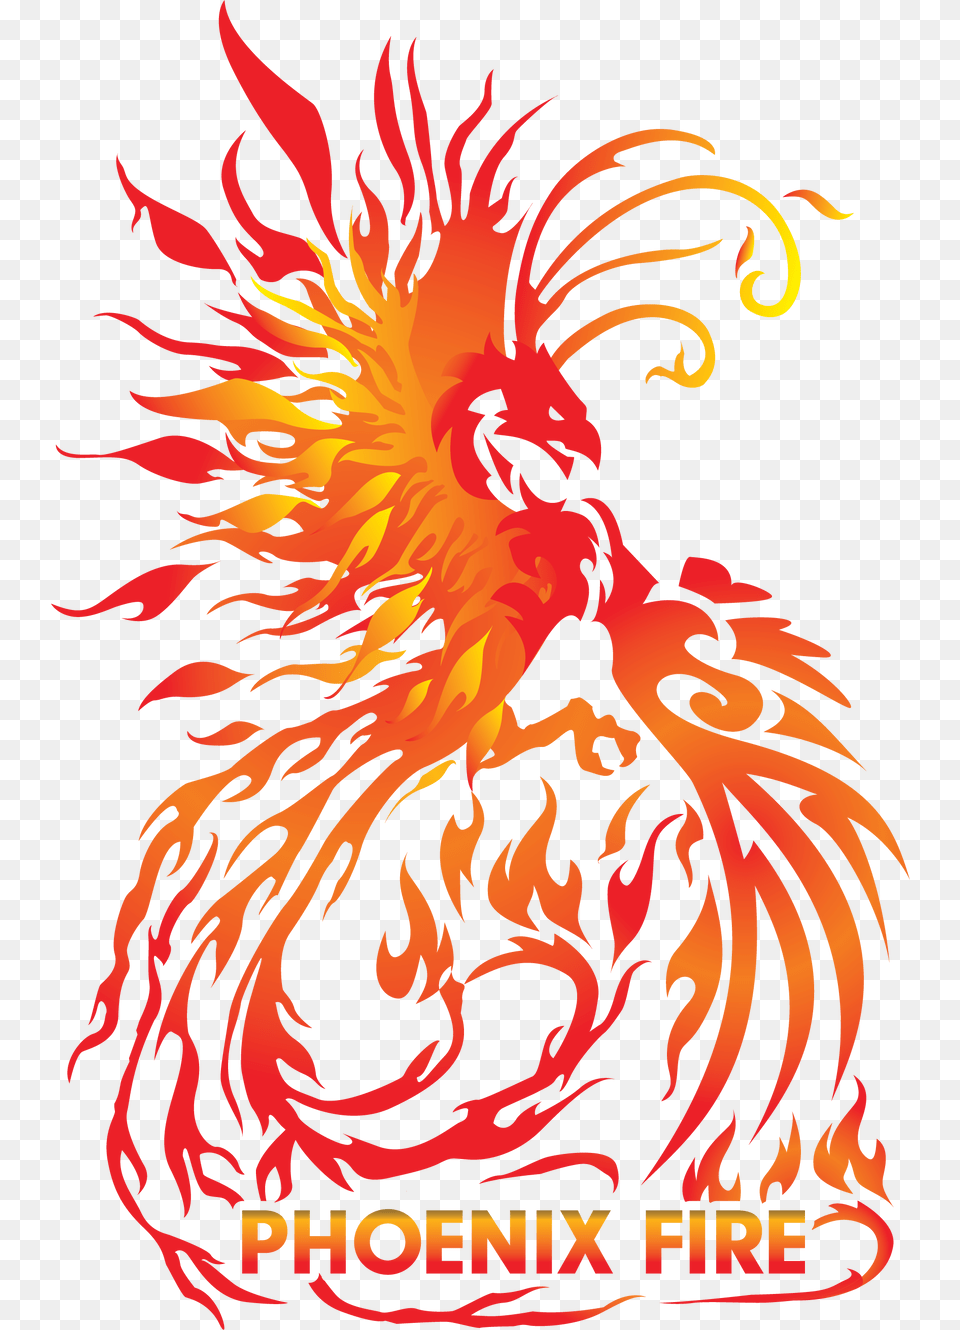 Phoenix Fire Logo Illustration, Outdoors, Nature, Mountain, Adult Free Transparent Png